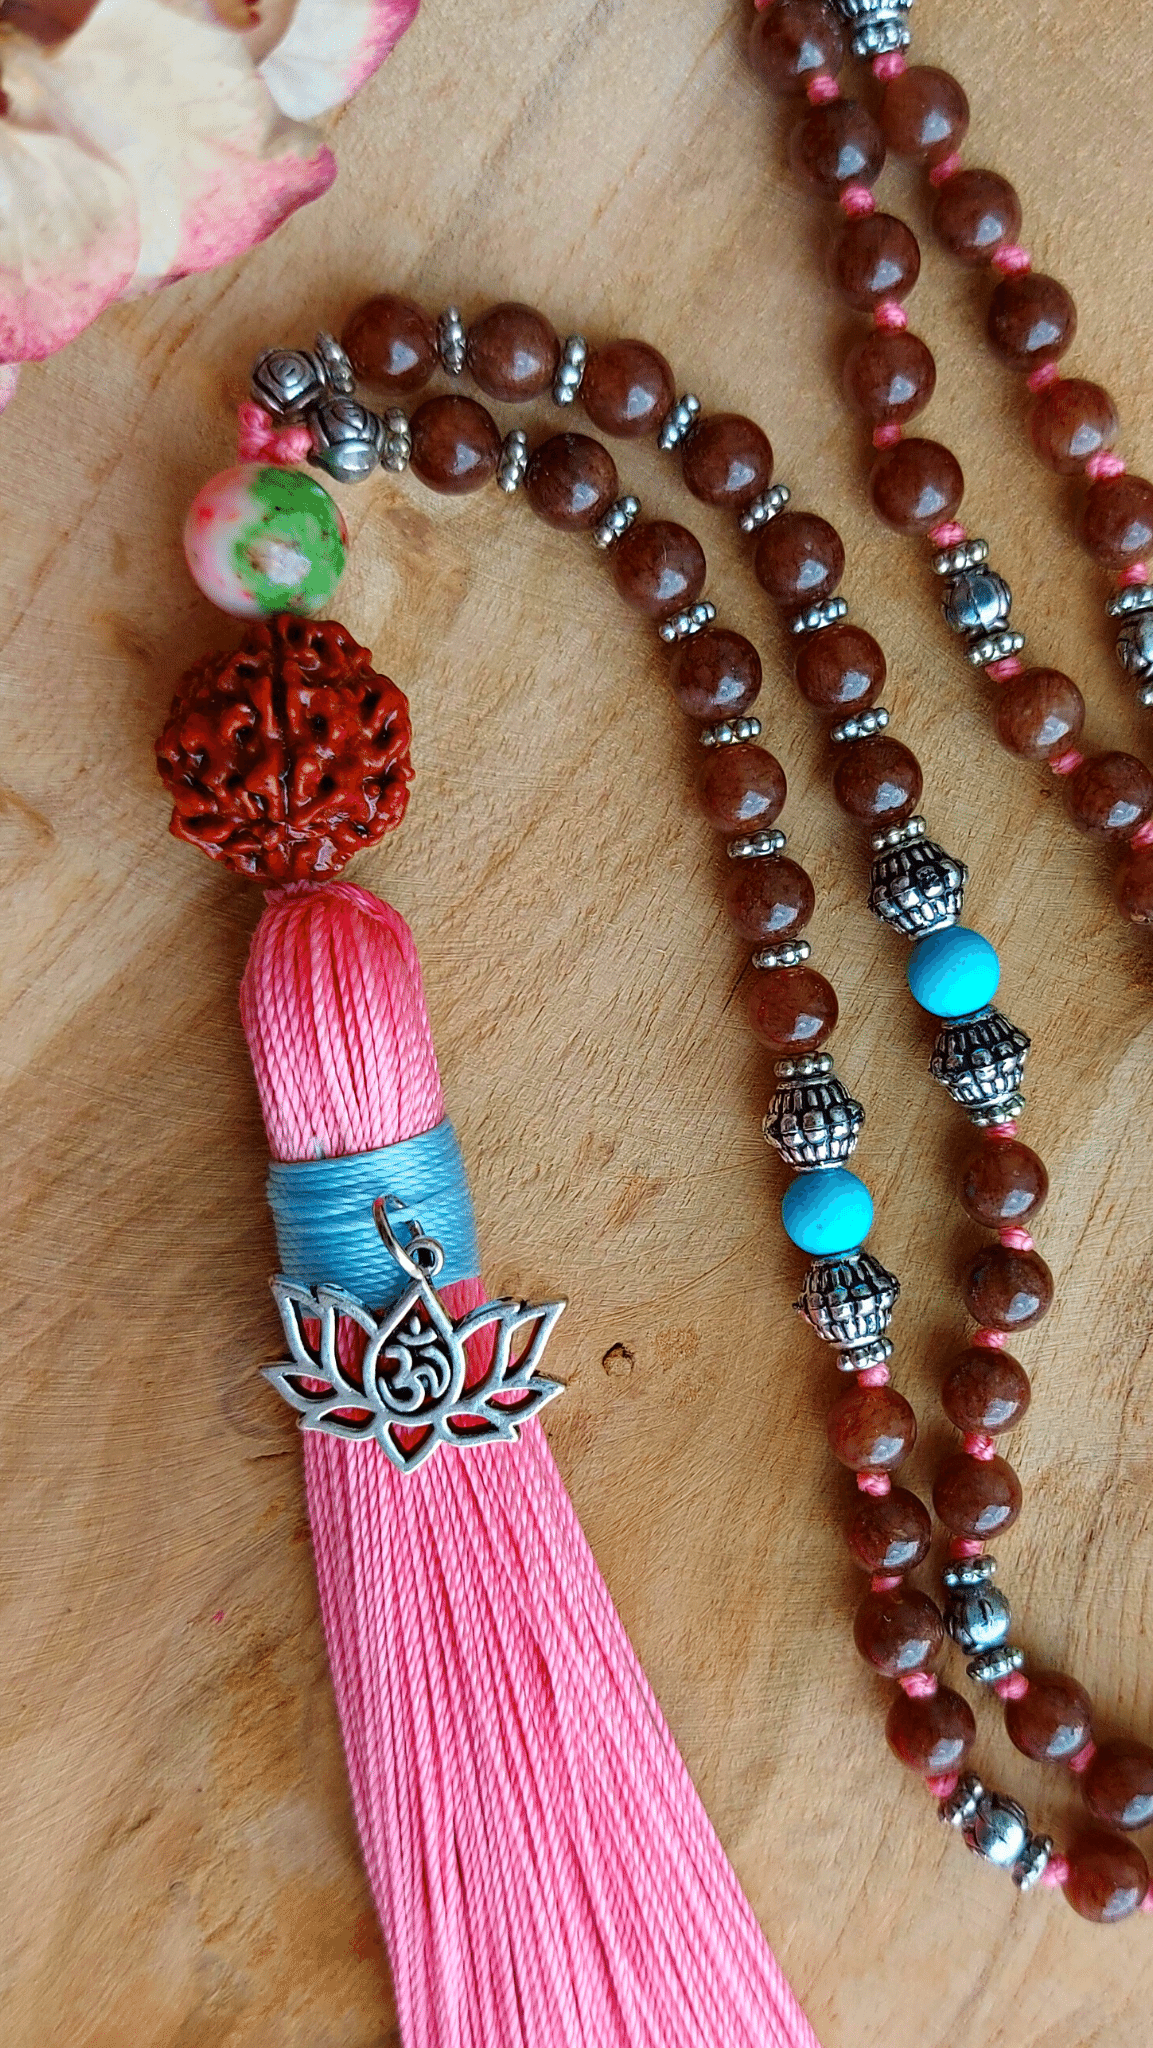 CALM MIND Mala Meditation Necklace with Brown, Oranje, Pink Agate, Blue Turquoise, Pink Green Persian Jade